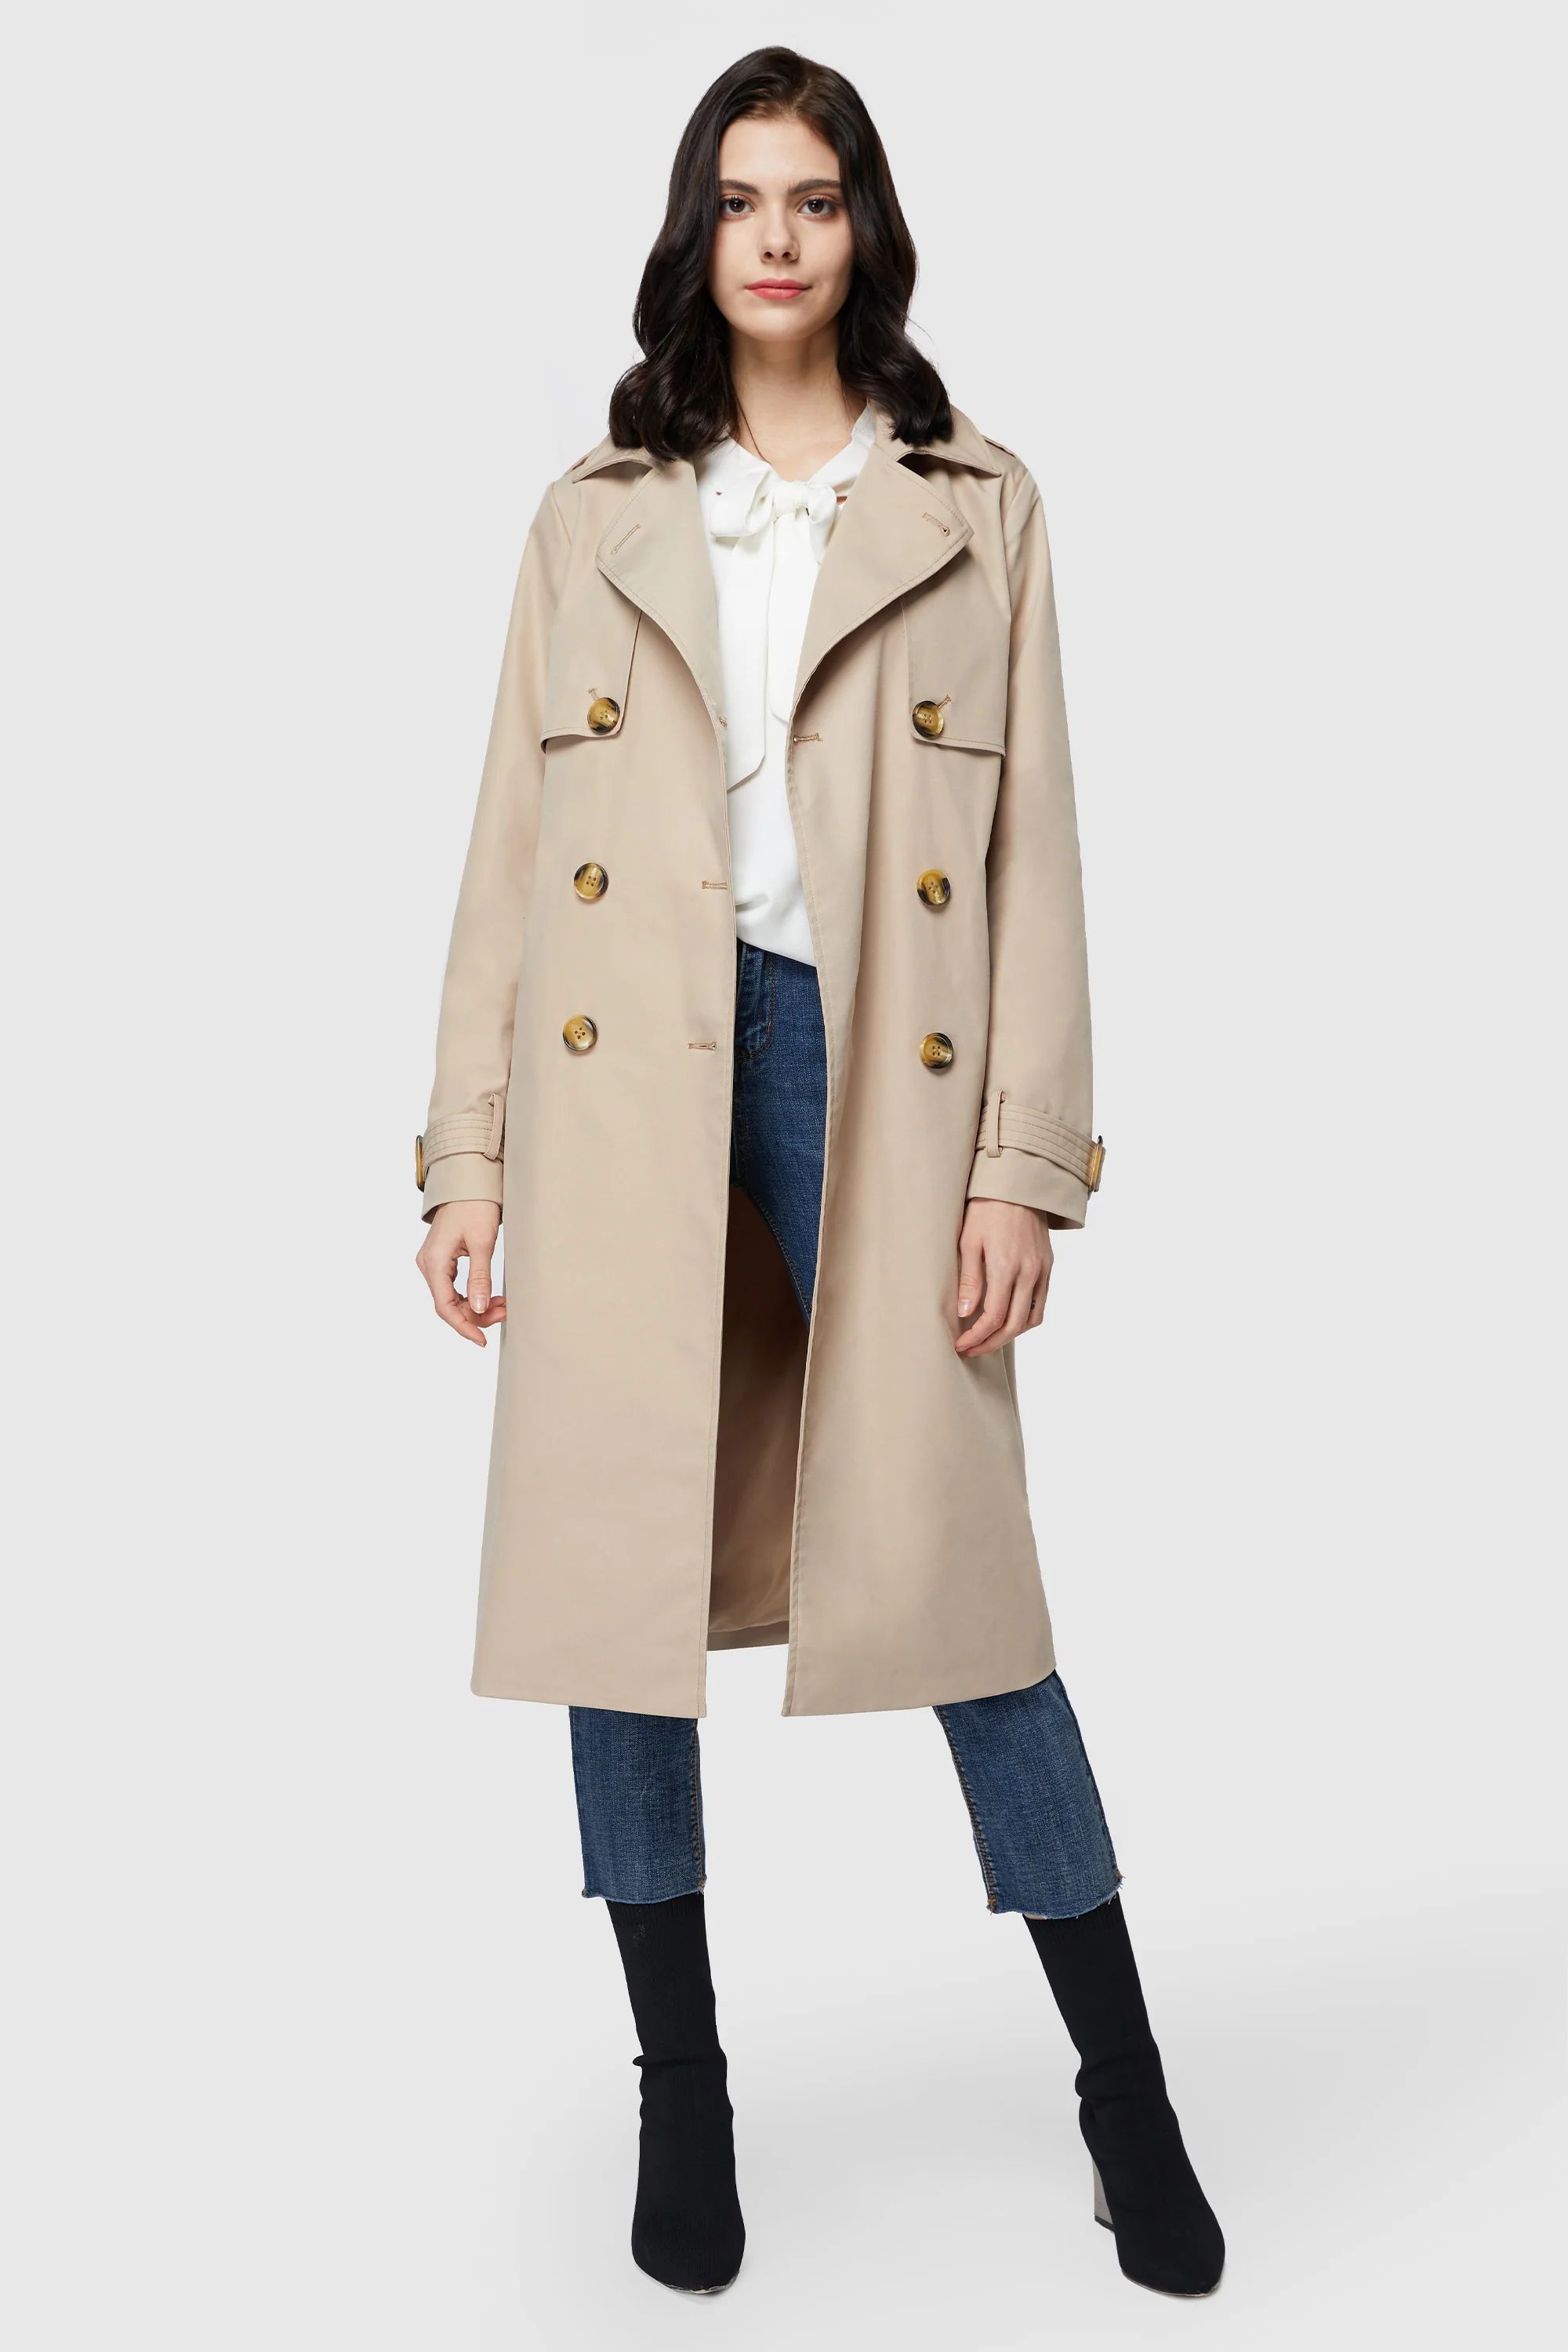 Orolay 3/4 Length Belted Double-Breasted Trench Coat | Orolay